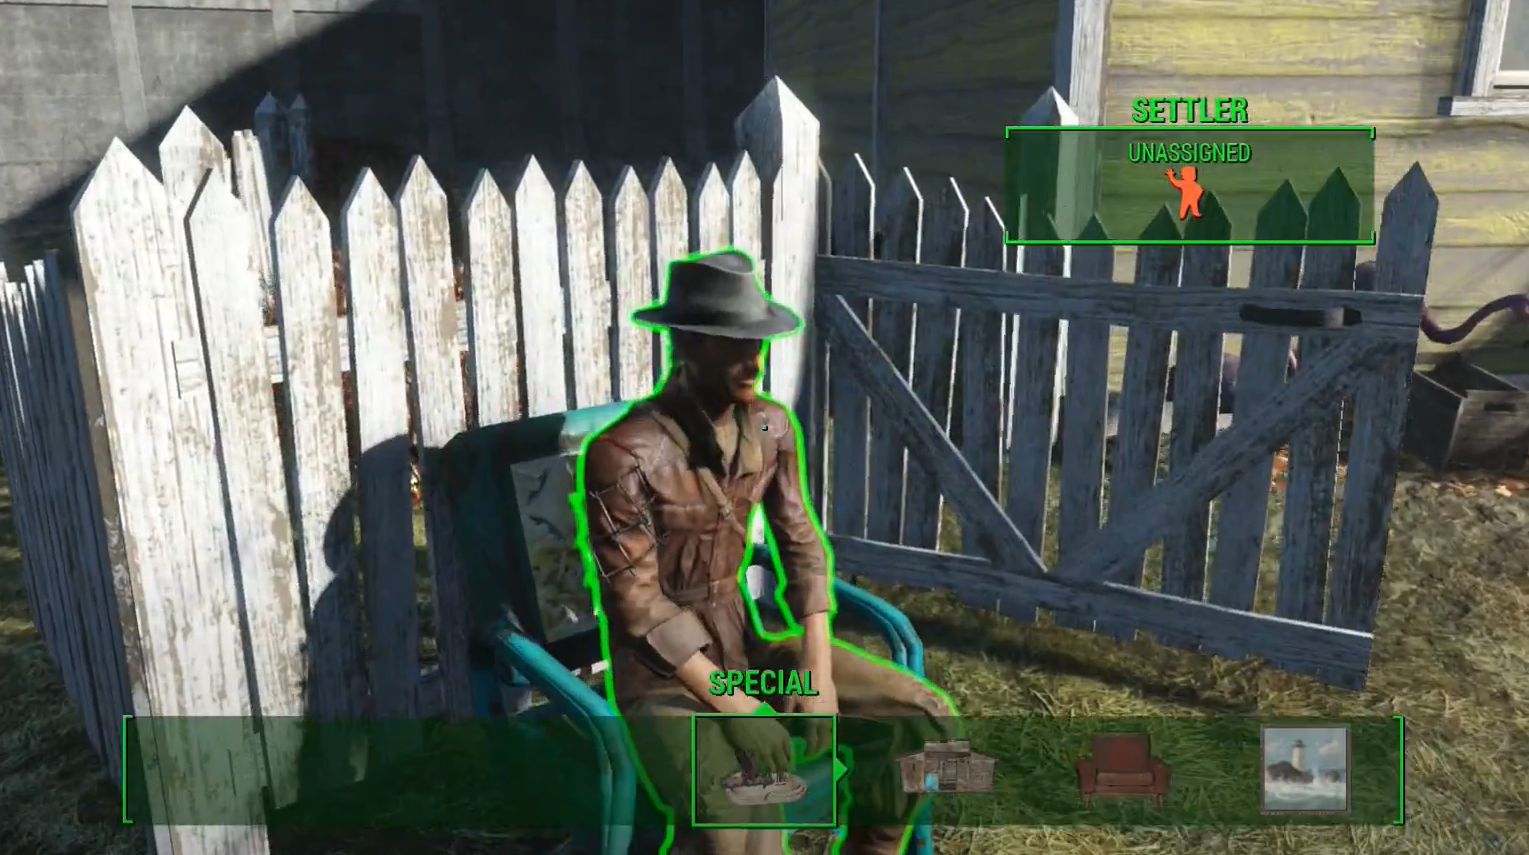 In Fallout 4, you can assign any worker that has a red icon when you point at that worker.